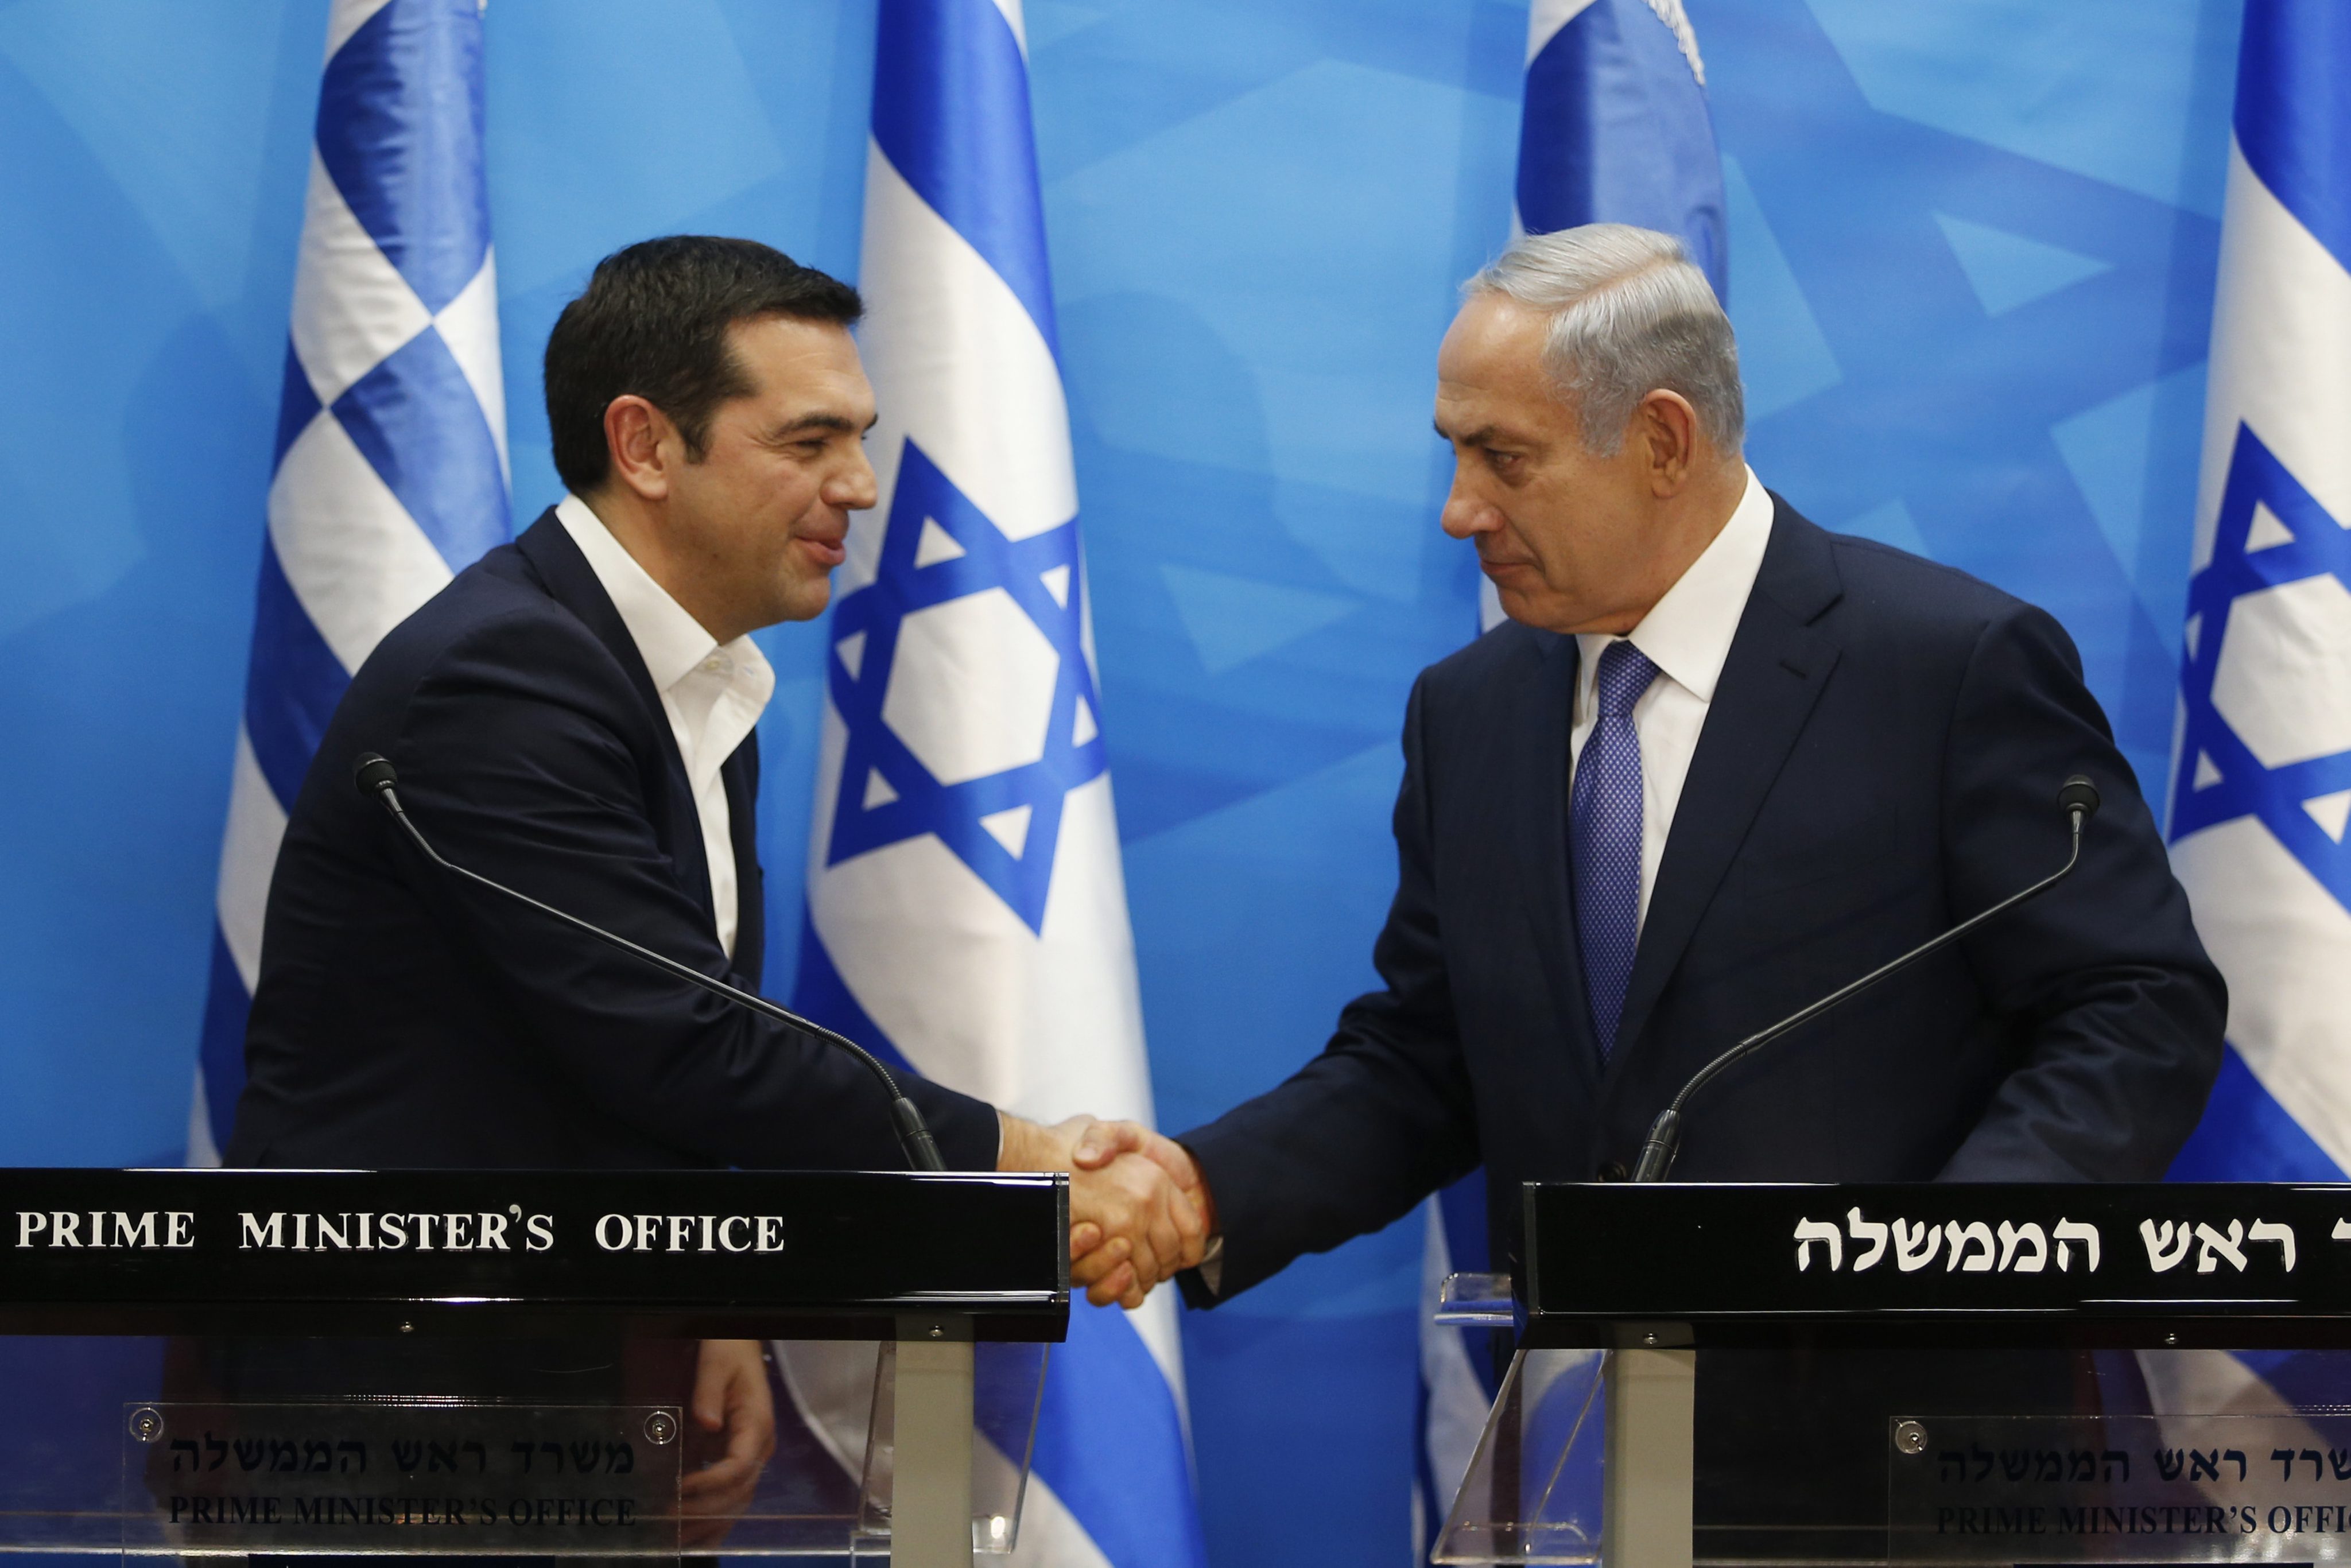 Greece and Israel satisfied over high-level strategic cooperation